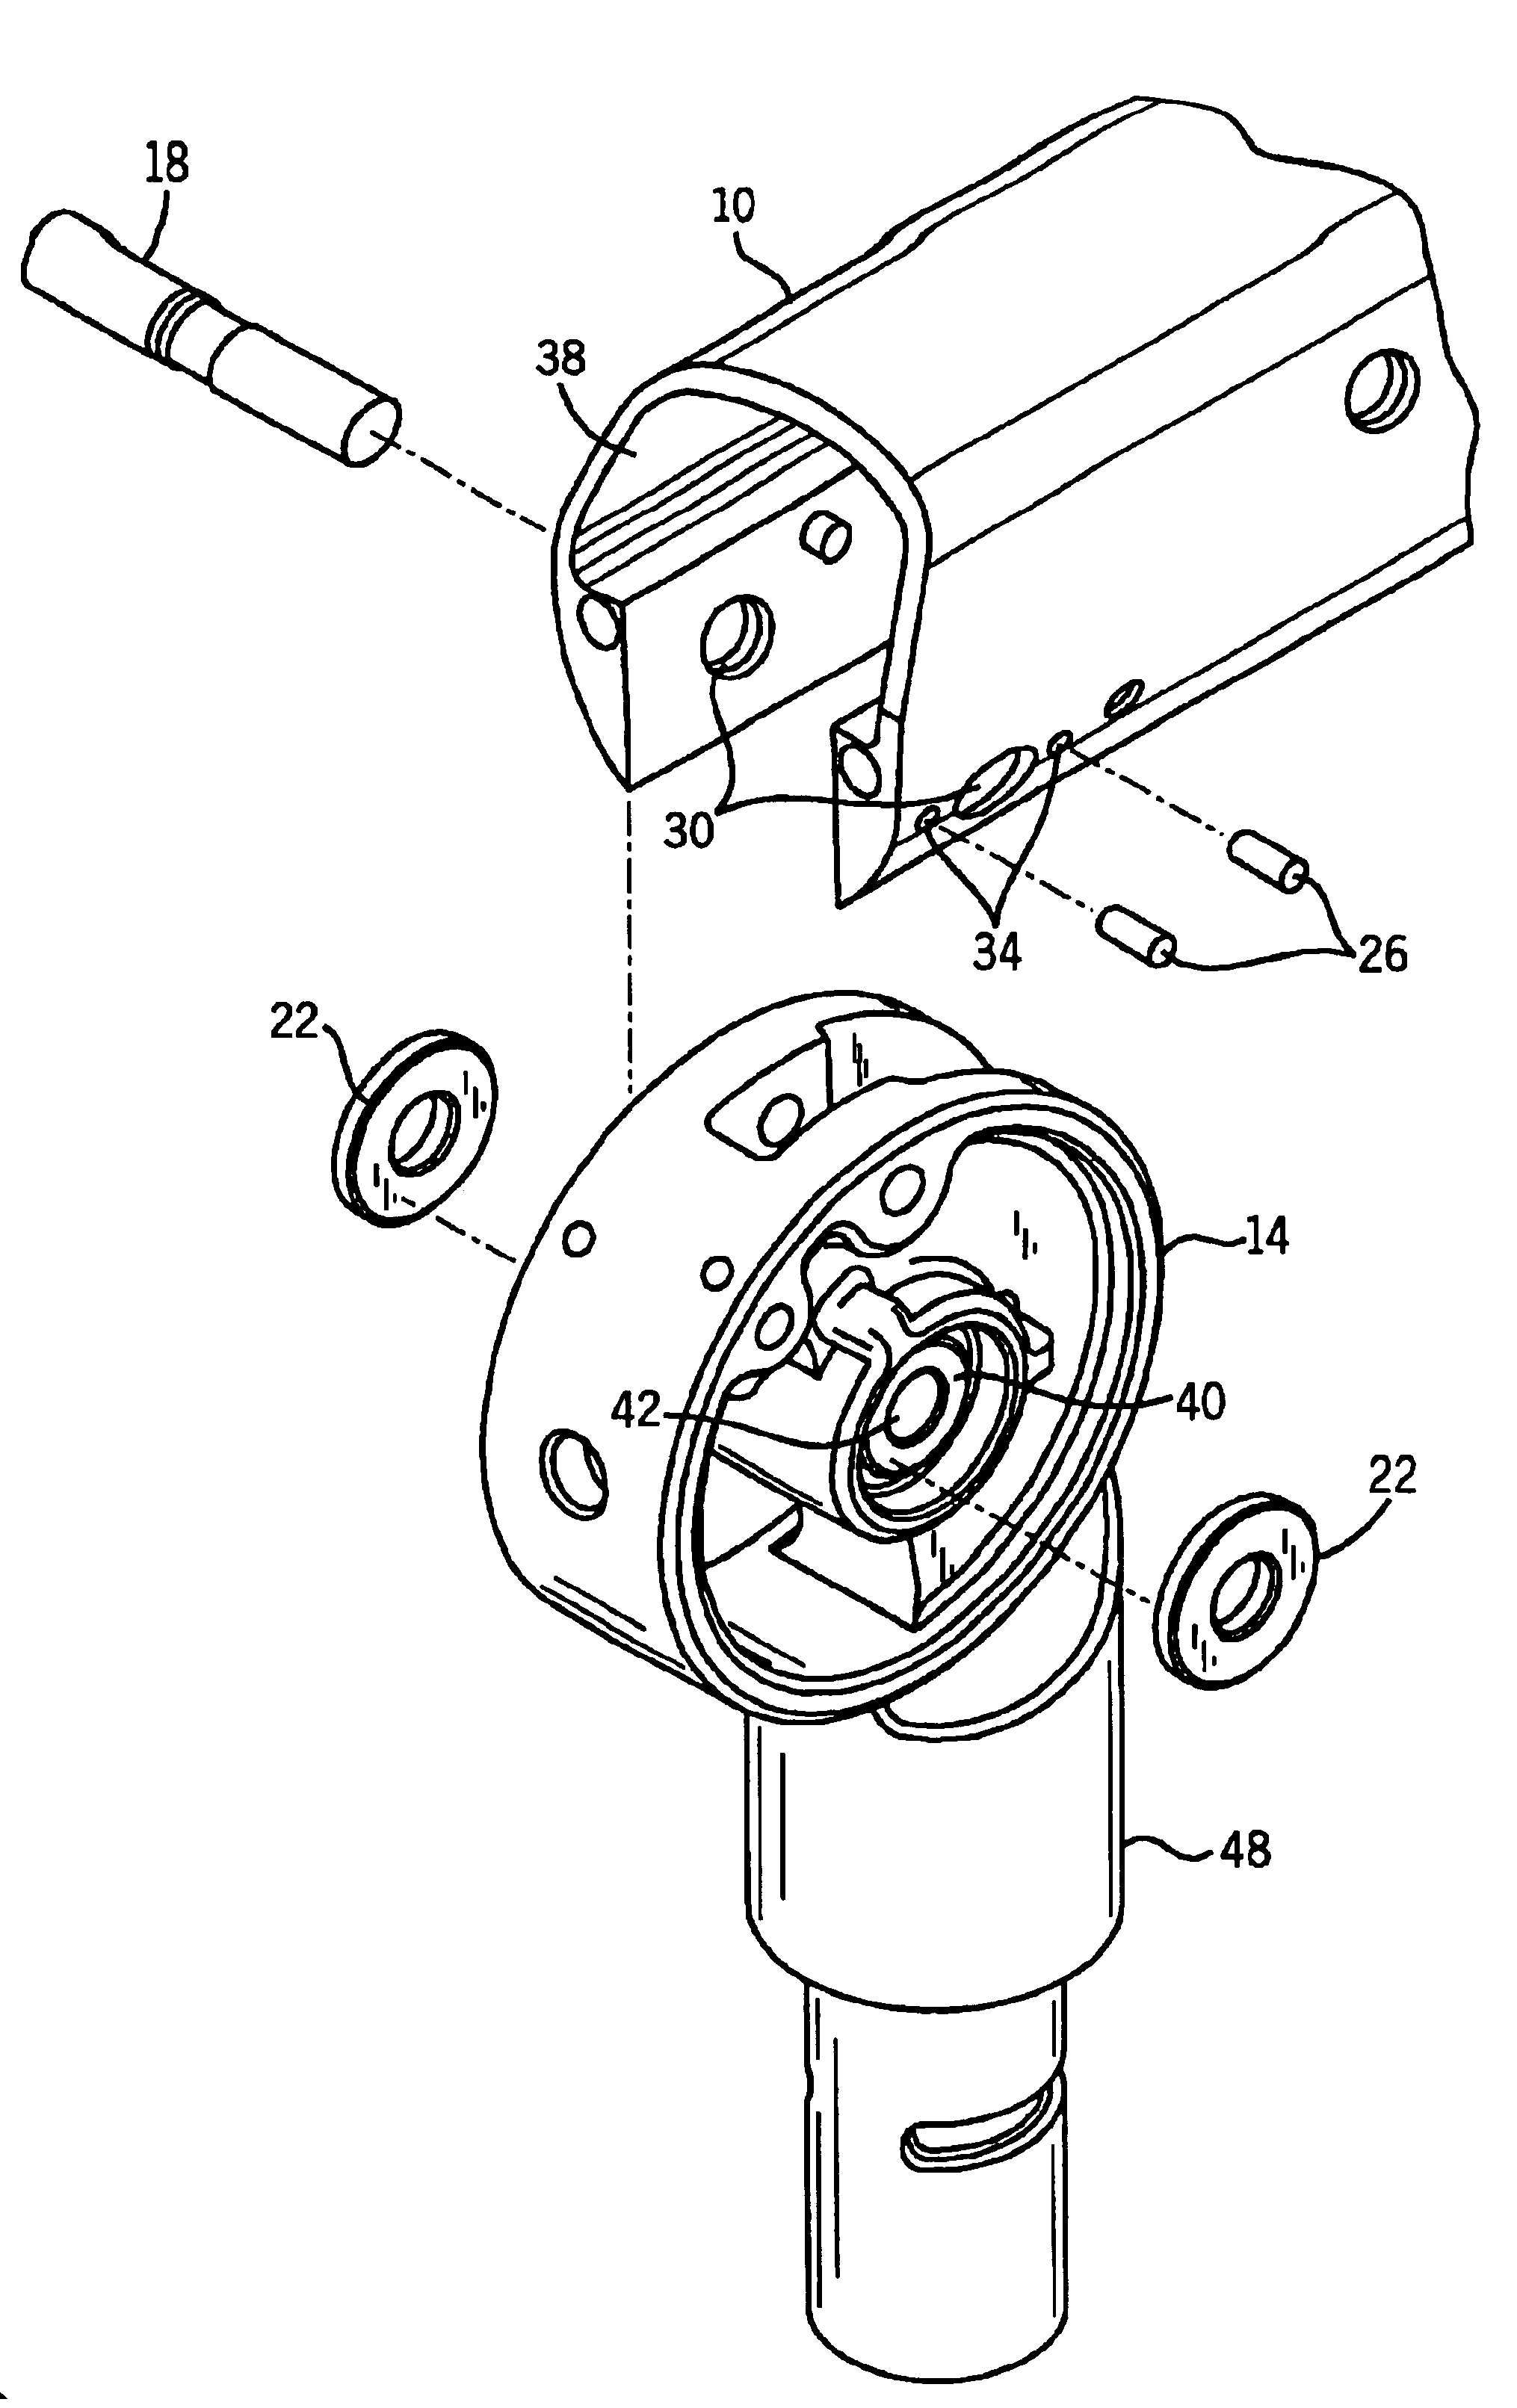 Friction control for articulating arm joint